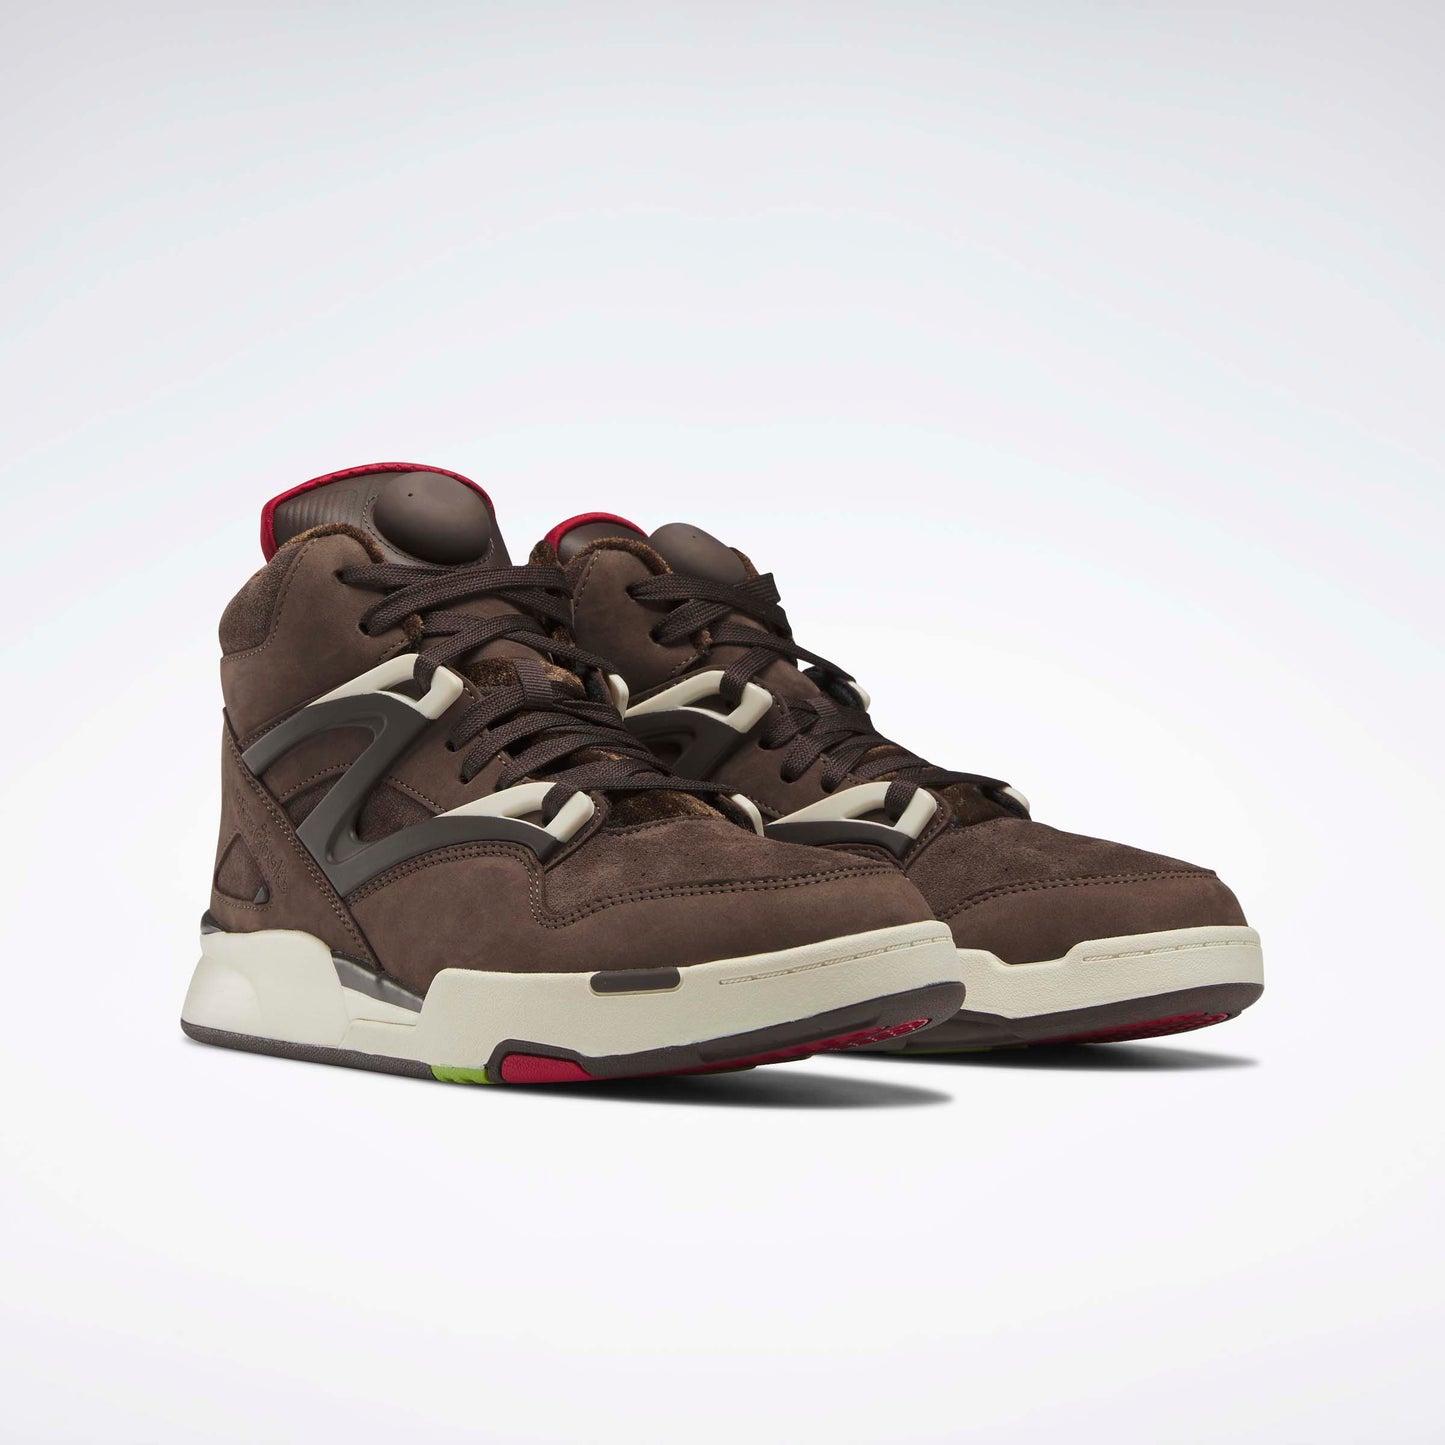 Pump Omni Zone II Basketball Shoes Grizzly Brown/Dk Brown/Crimson